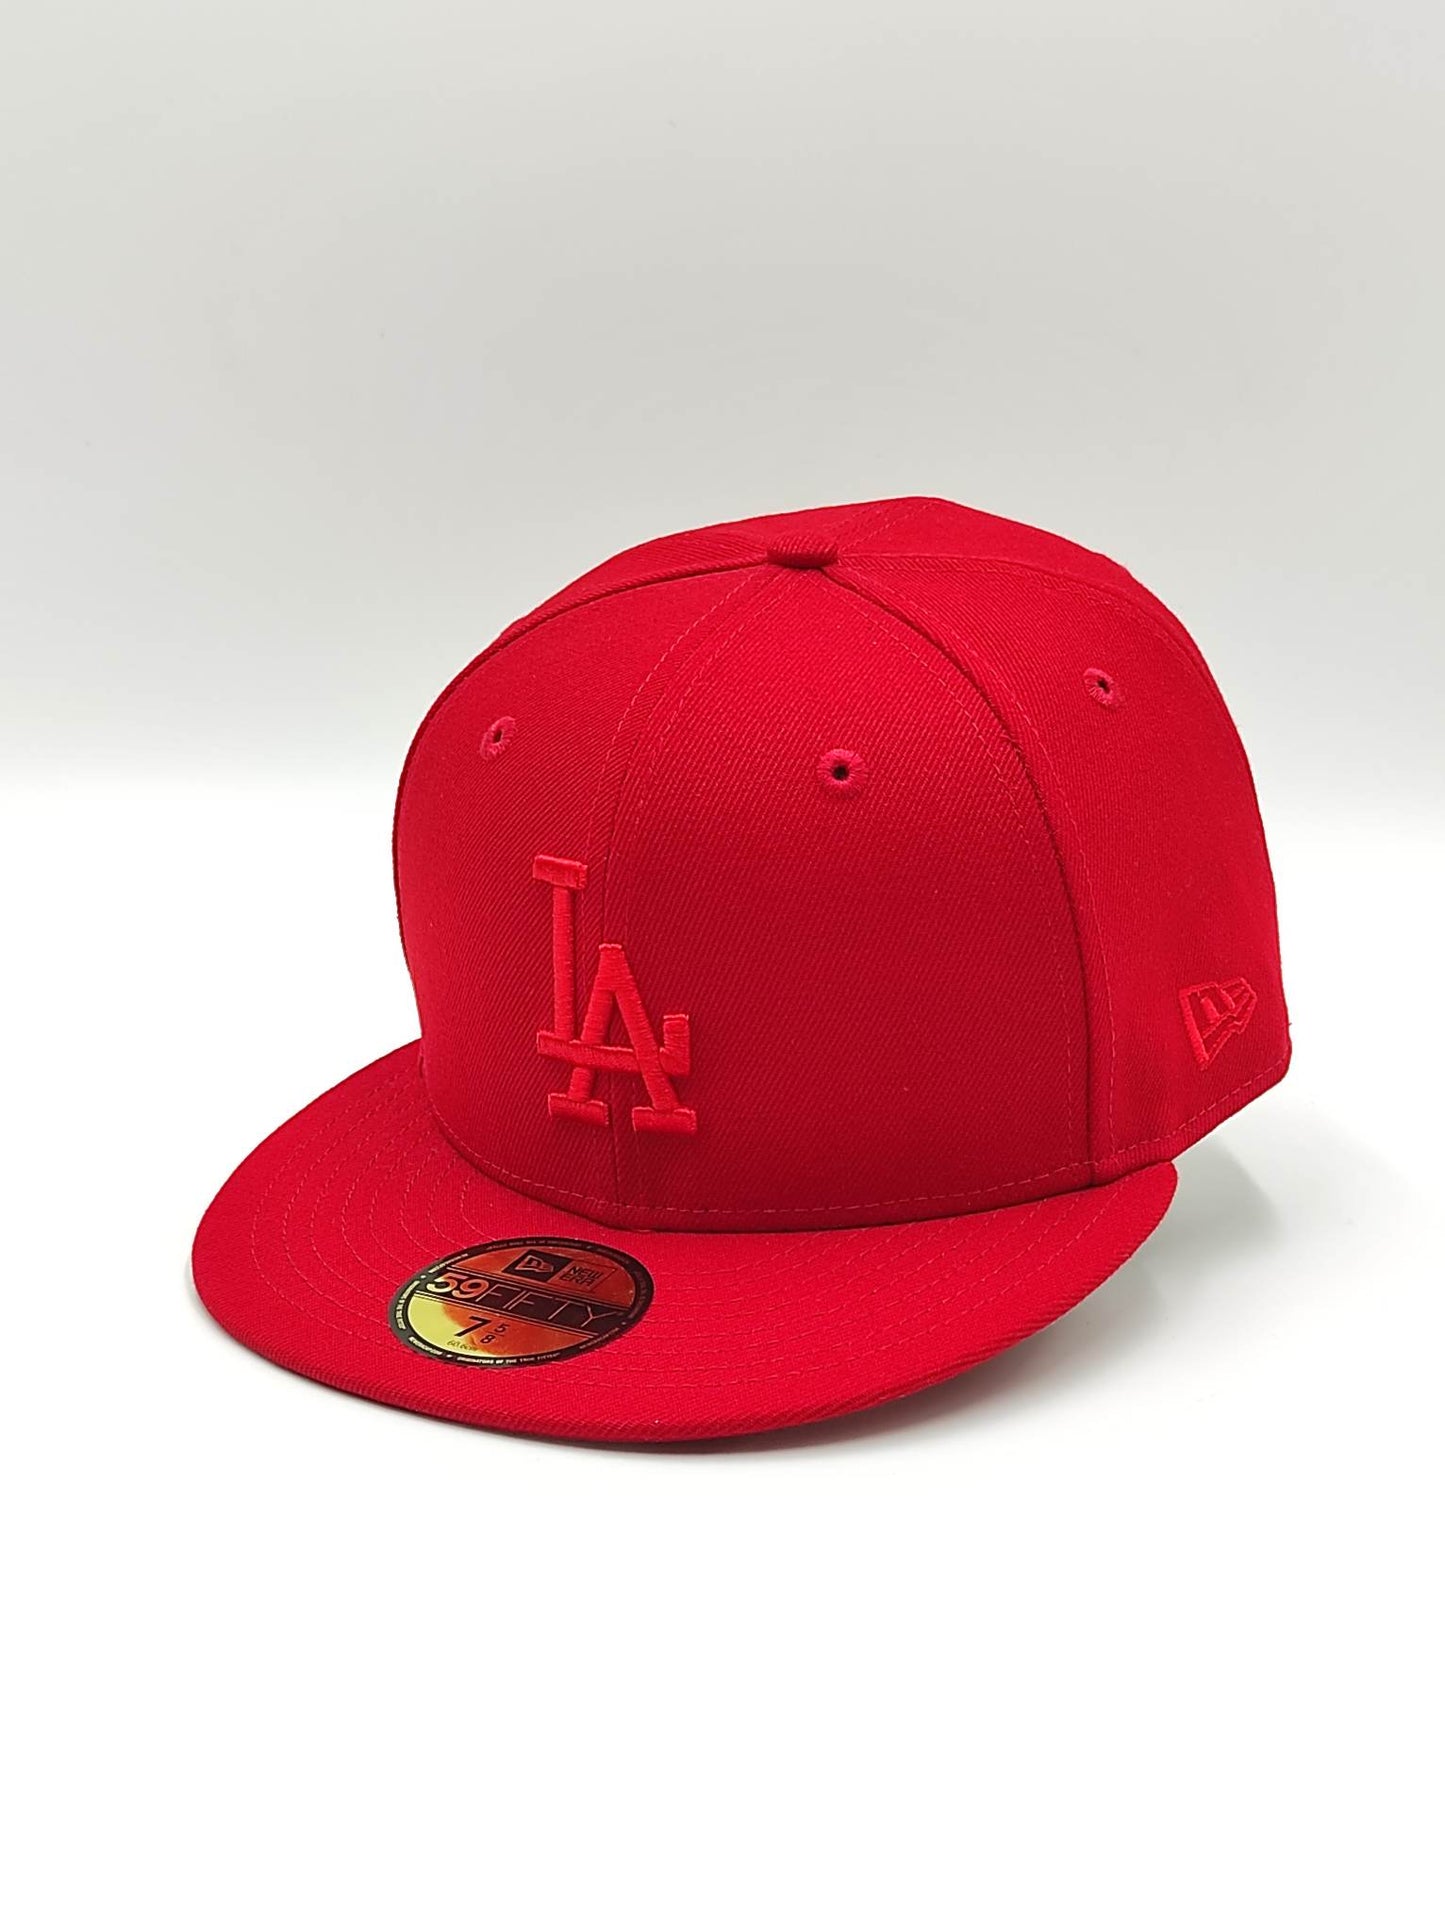 New Era Los Angeles Dodgers 59fifty red solid